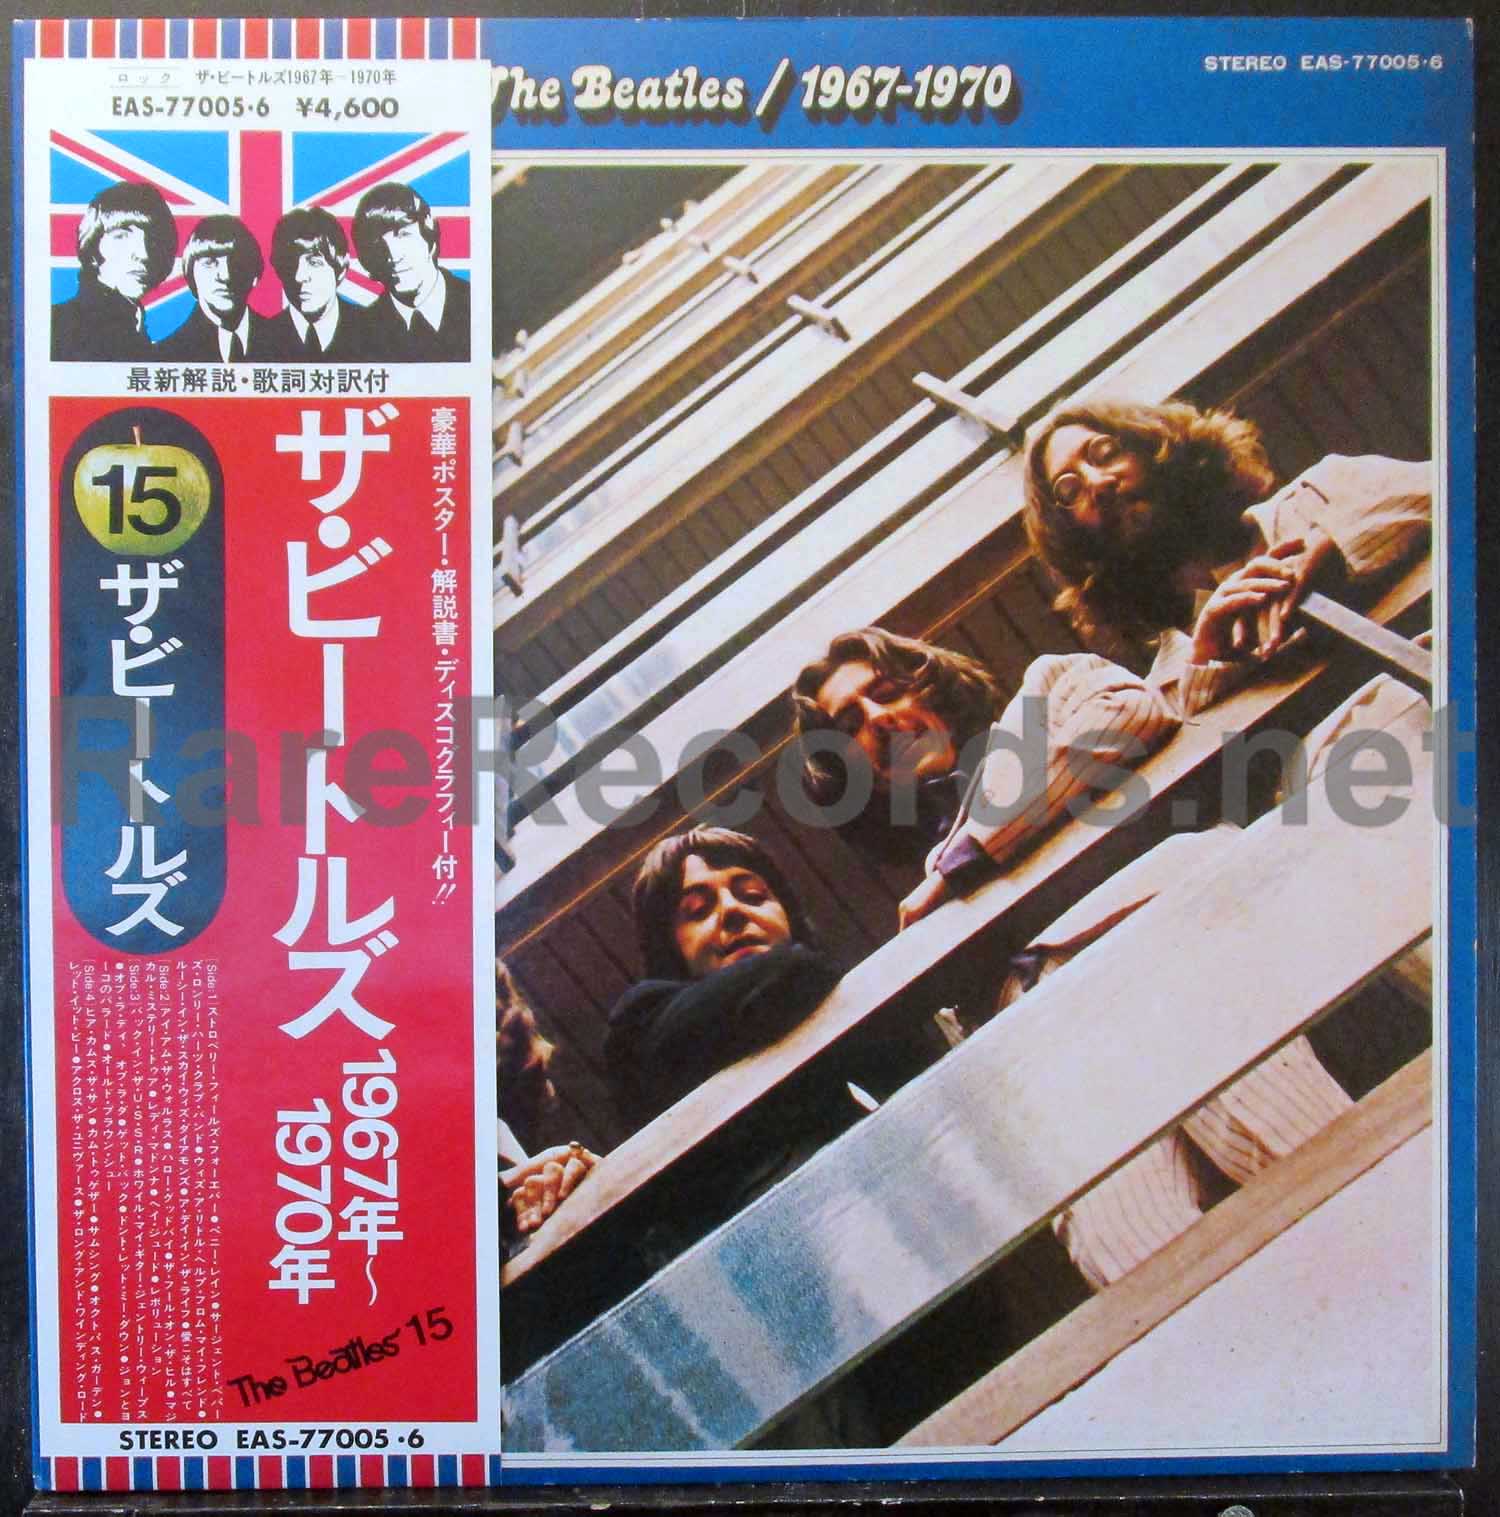 The Beatles – 1962-1966/1967-1970 1976 Japan 4 LP set with obi and posters